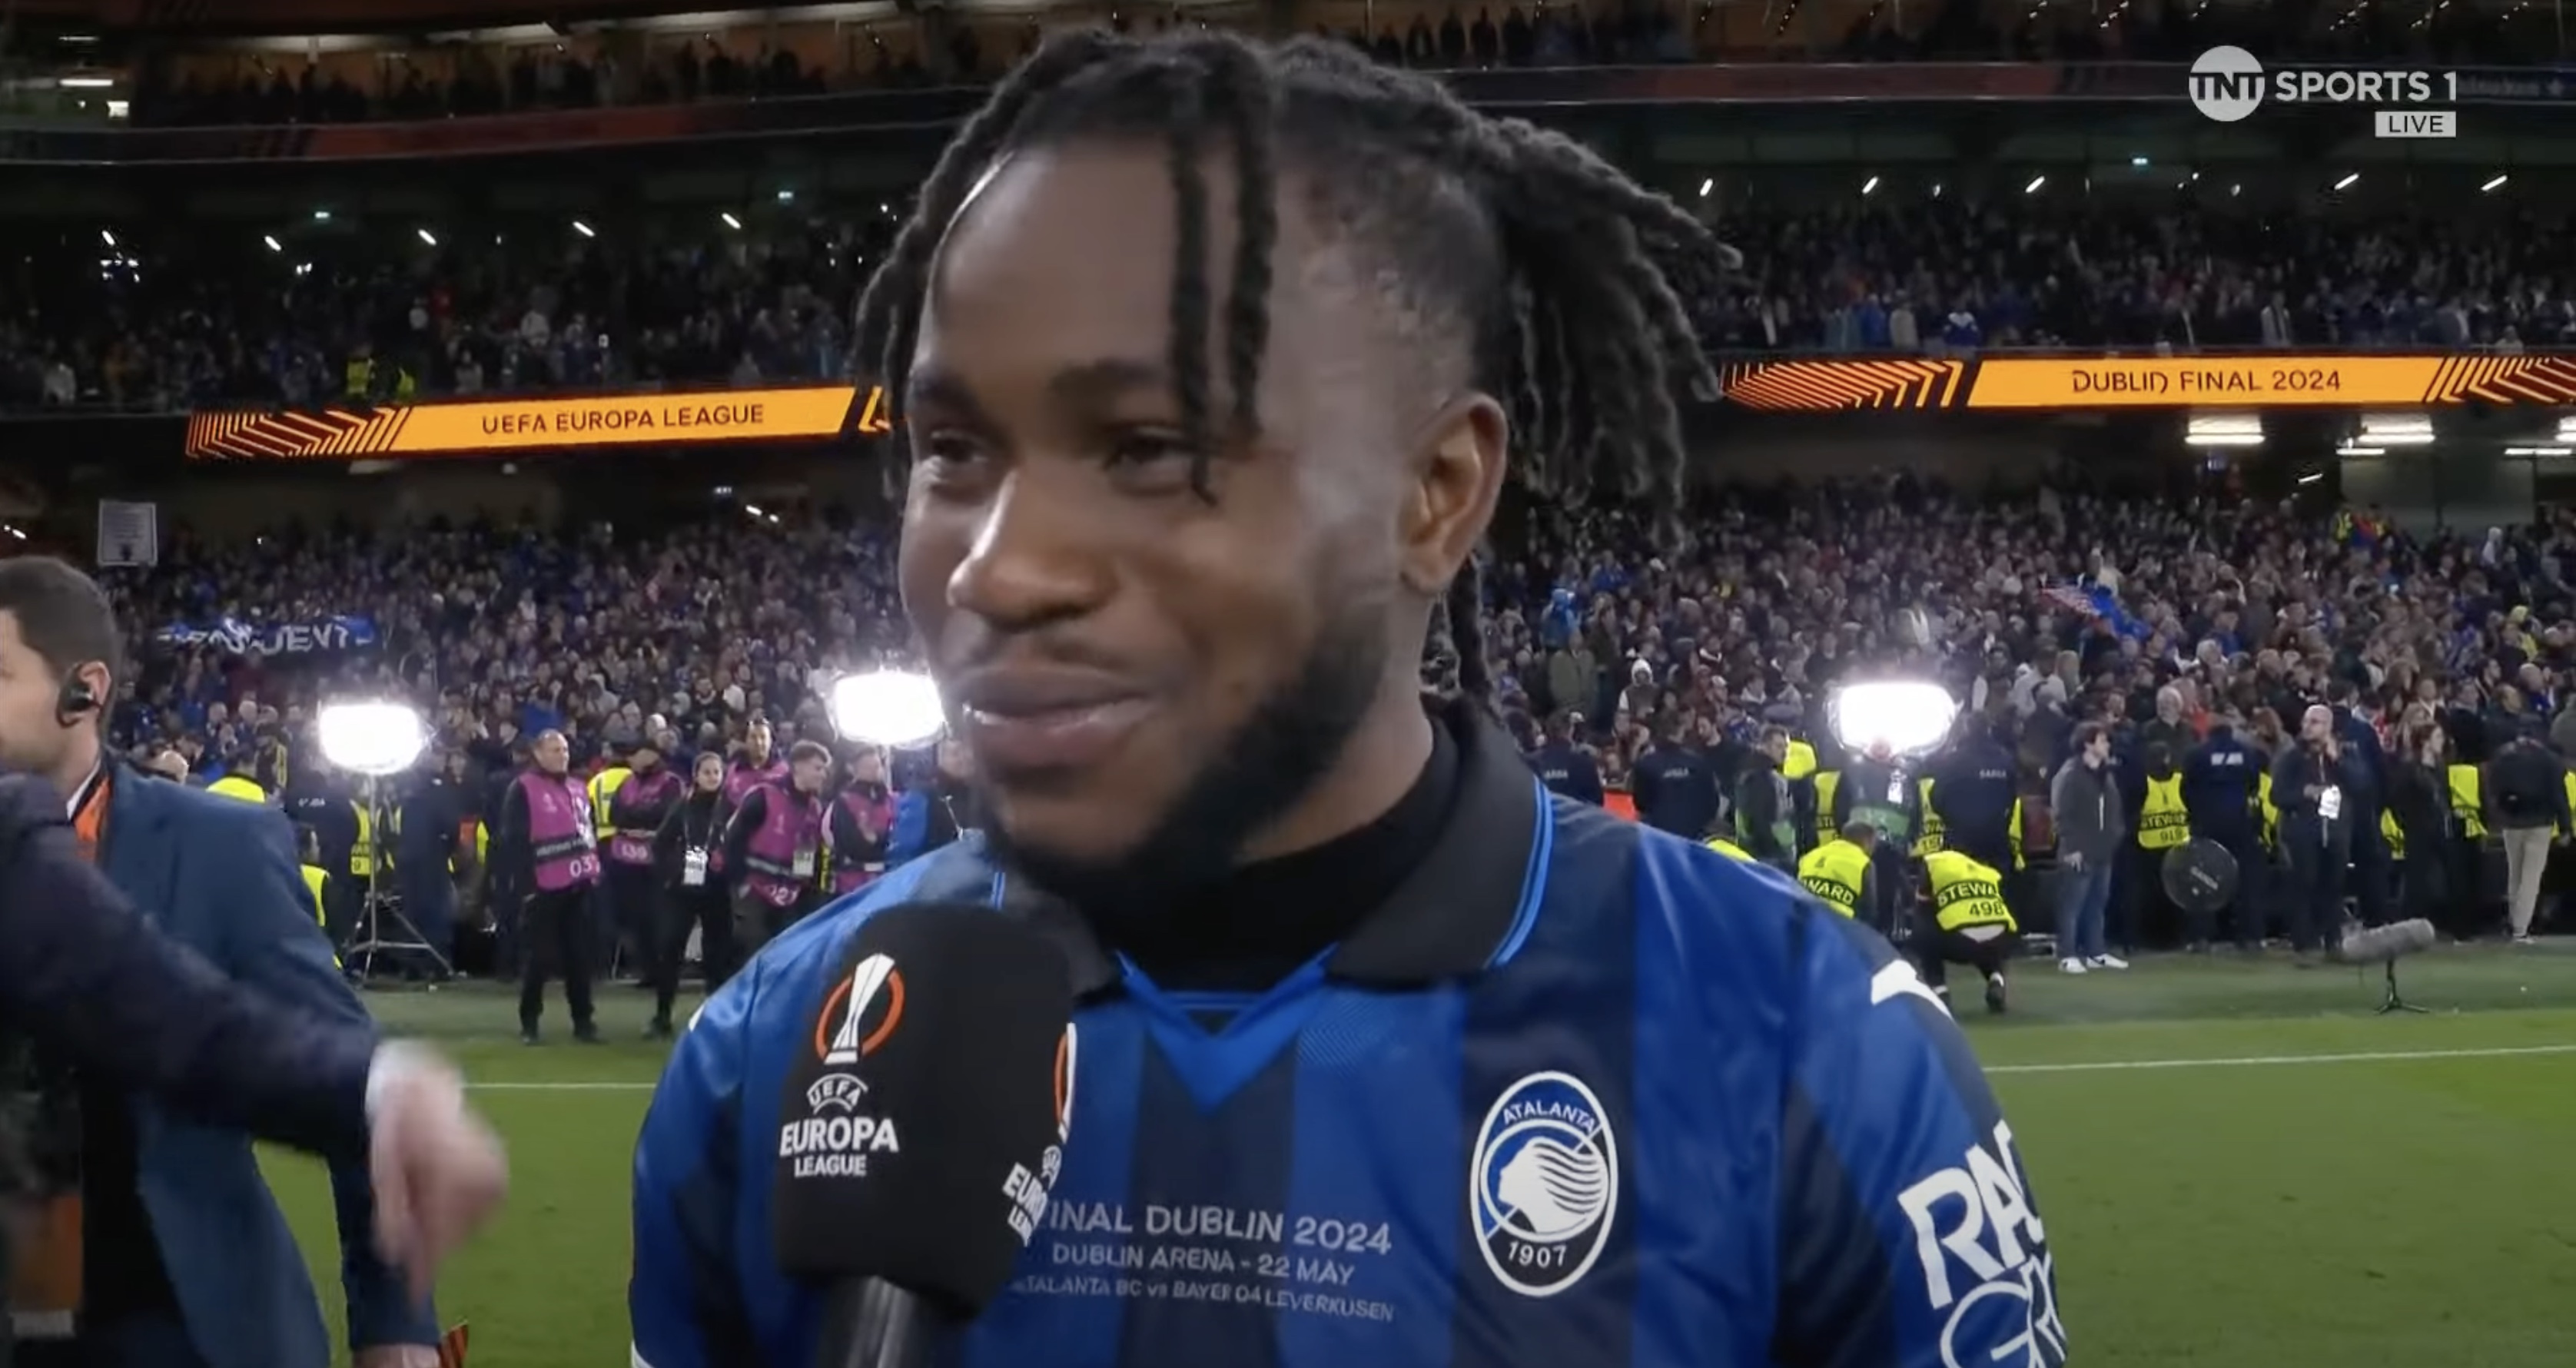 Video: “Best night of my life” – Ademola Lookman reacts to match winning Europa League final performance